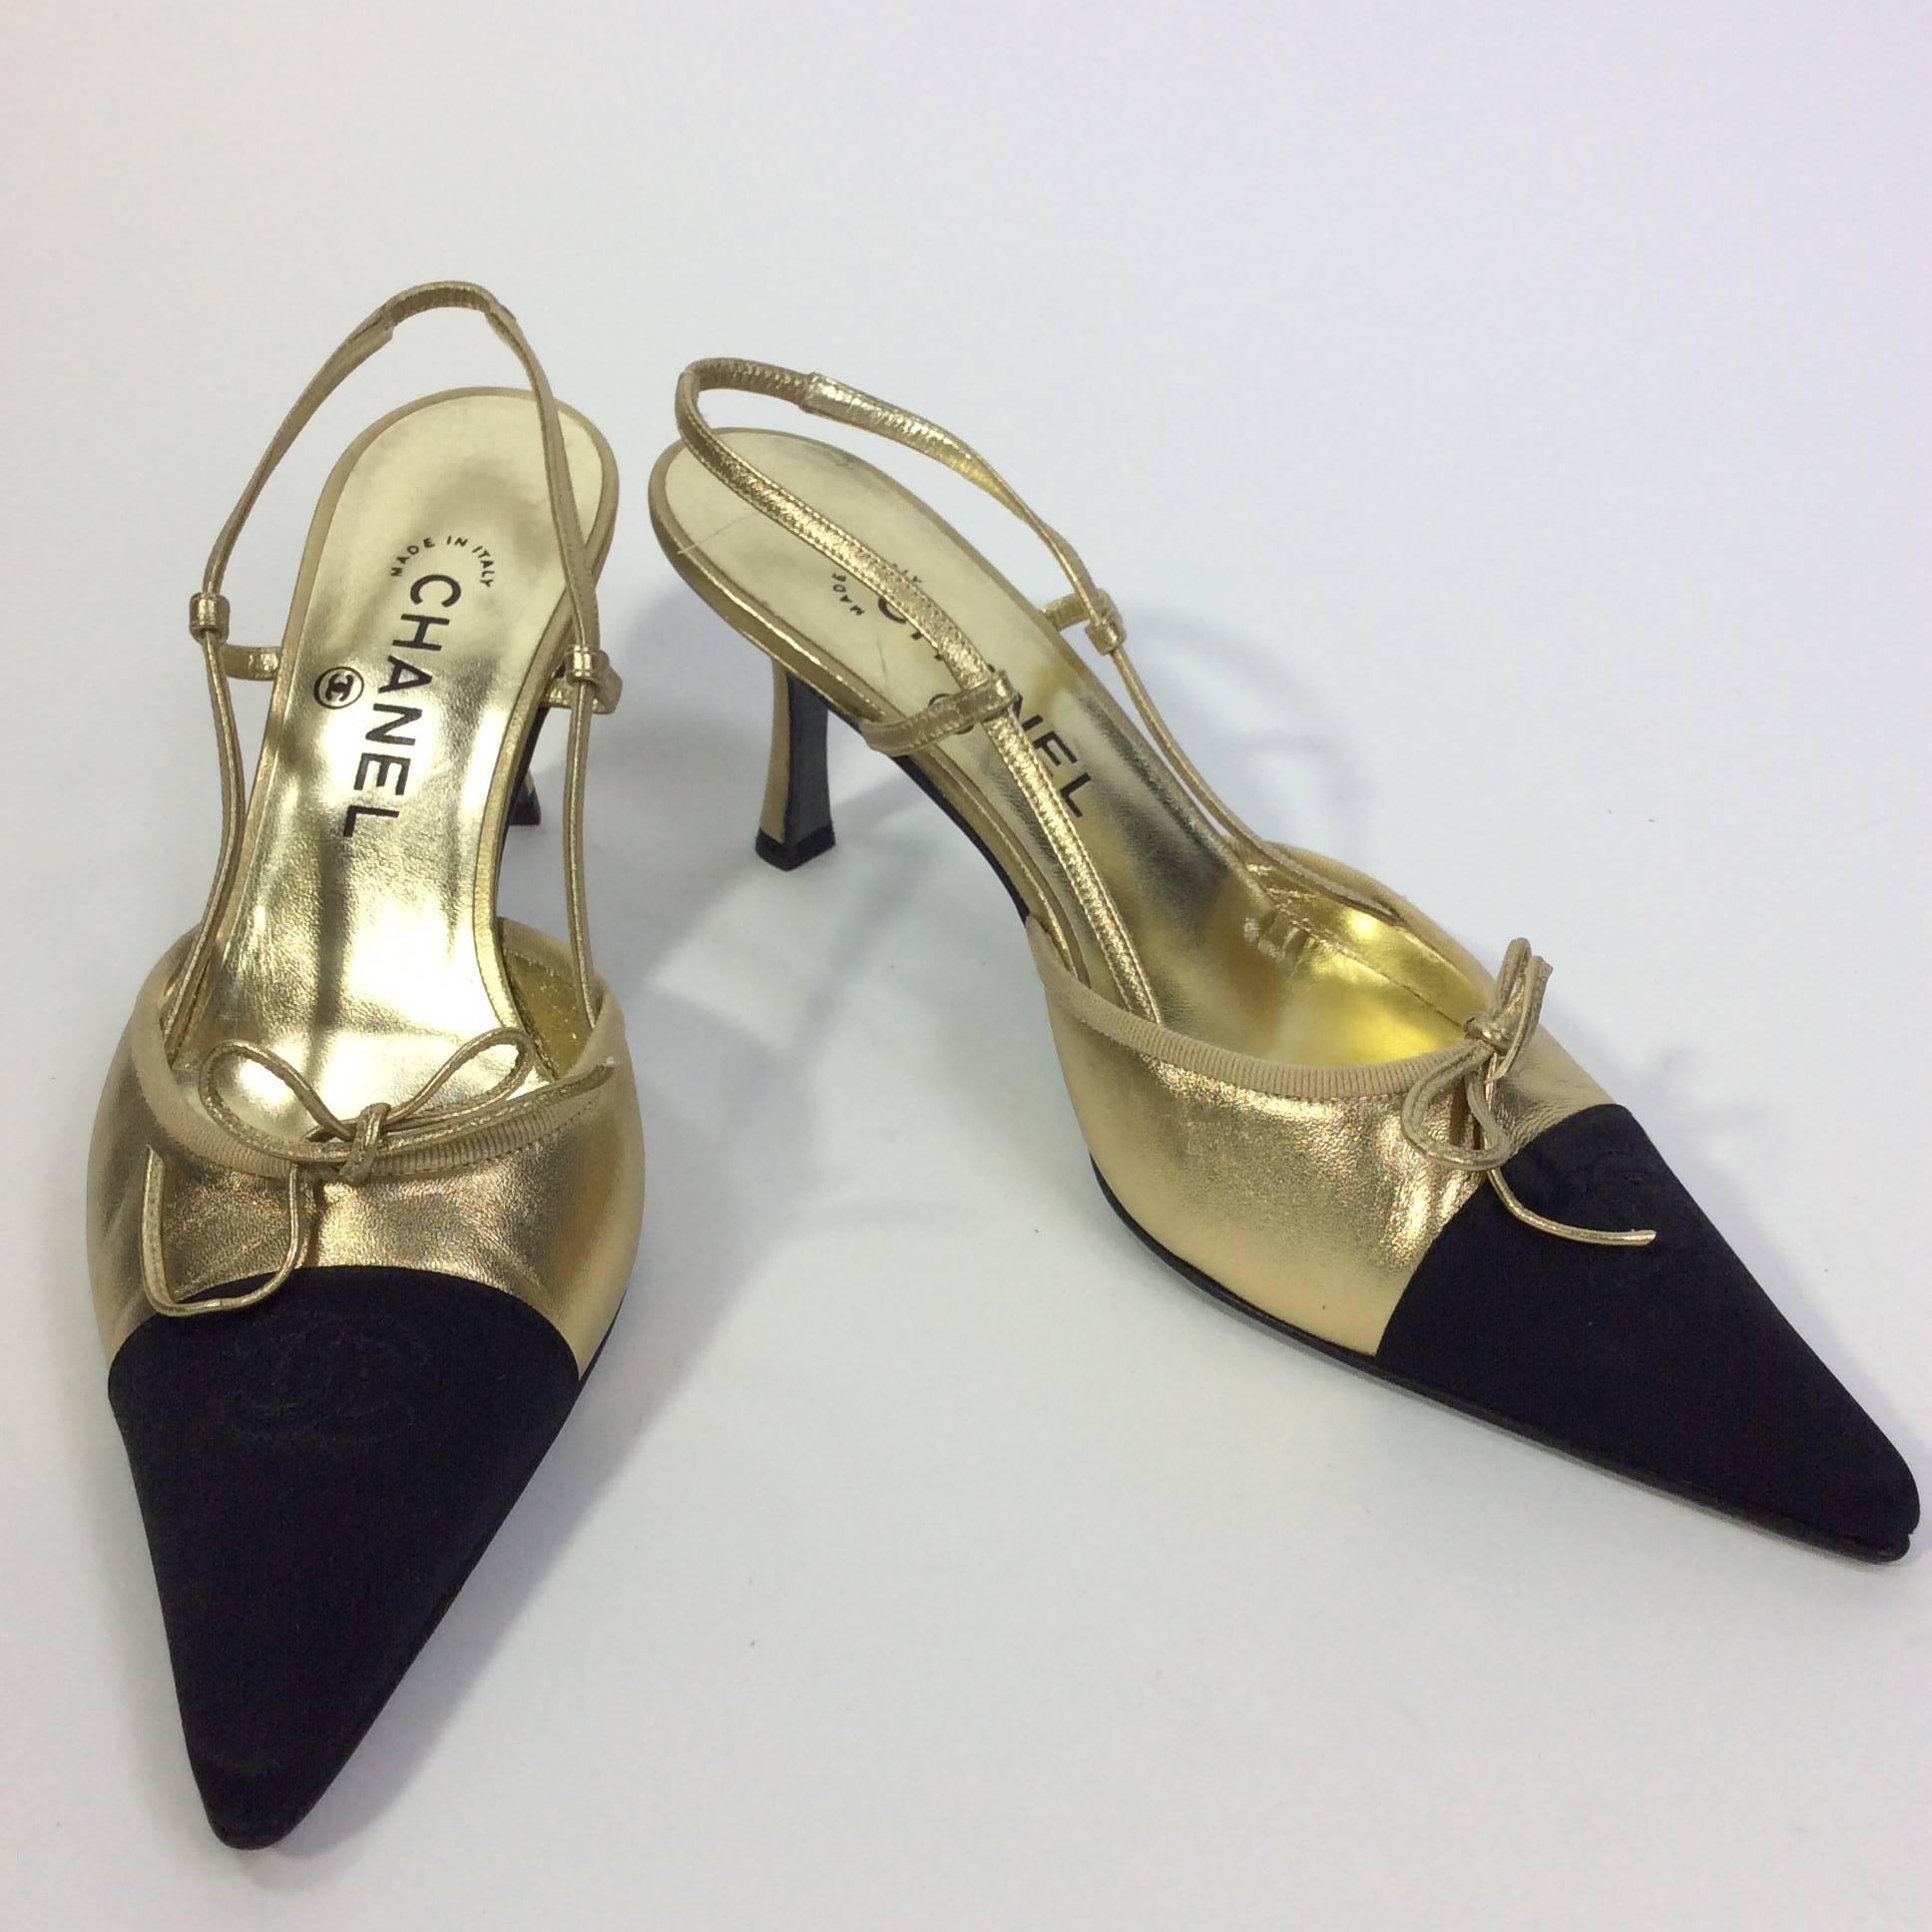 Gold and Black Slingback with Tie Detail
3 inch heel
3 inch sole width
Chanel logo stitching on black toe
Gold tie on toe
Elastic slingback style
Size 40 (equates to a US 9)
Leather and silk